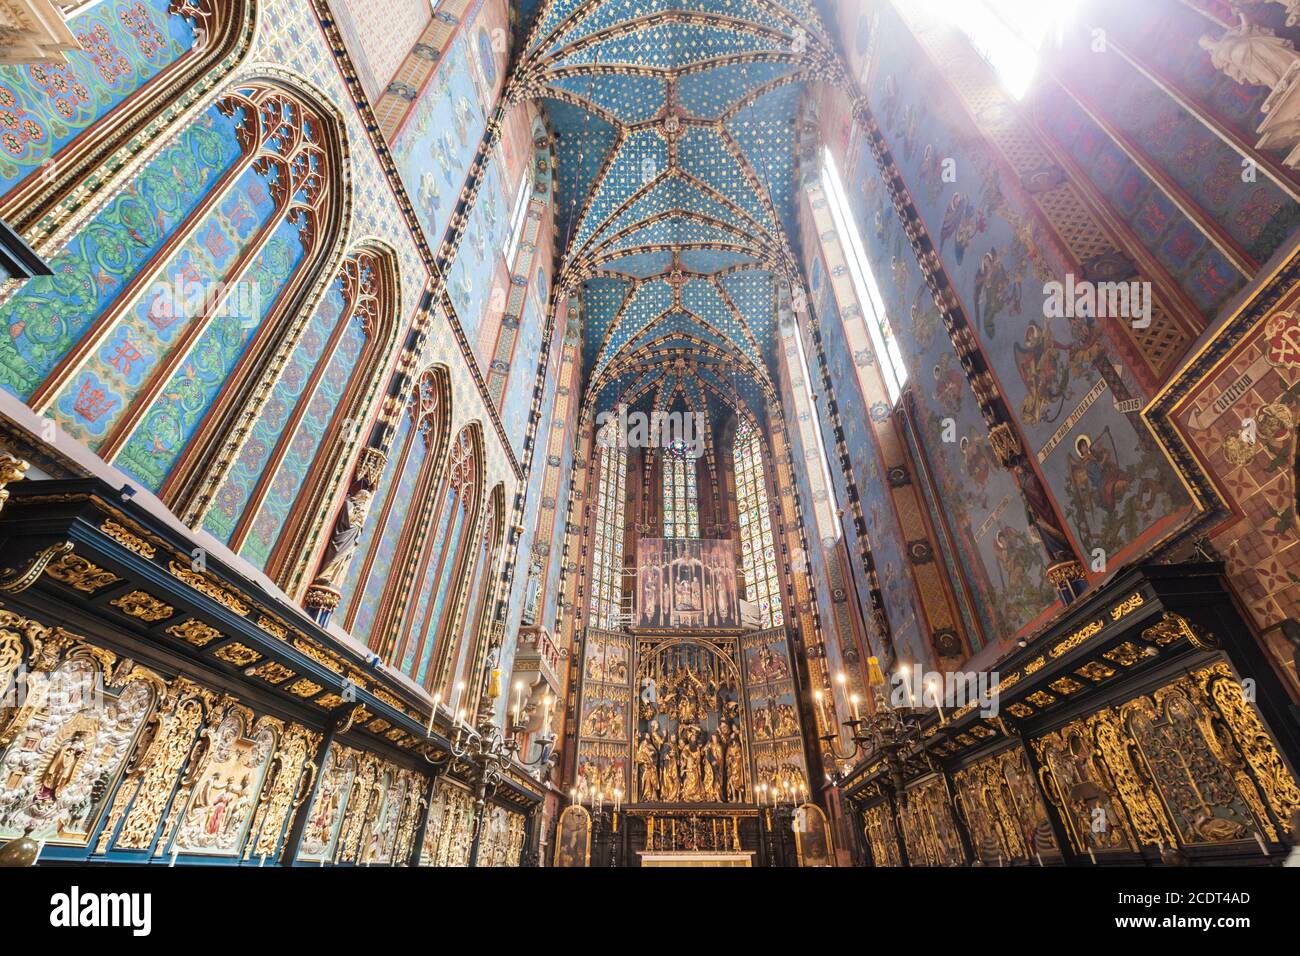 The altarpiece of Veit Stoss in St. Mary's Basilica, Cracow, Poland. Stock Photo